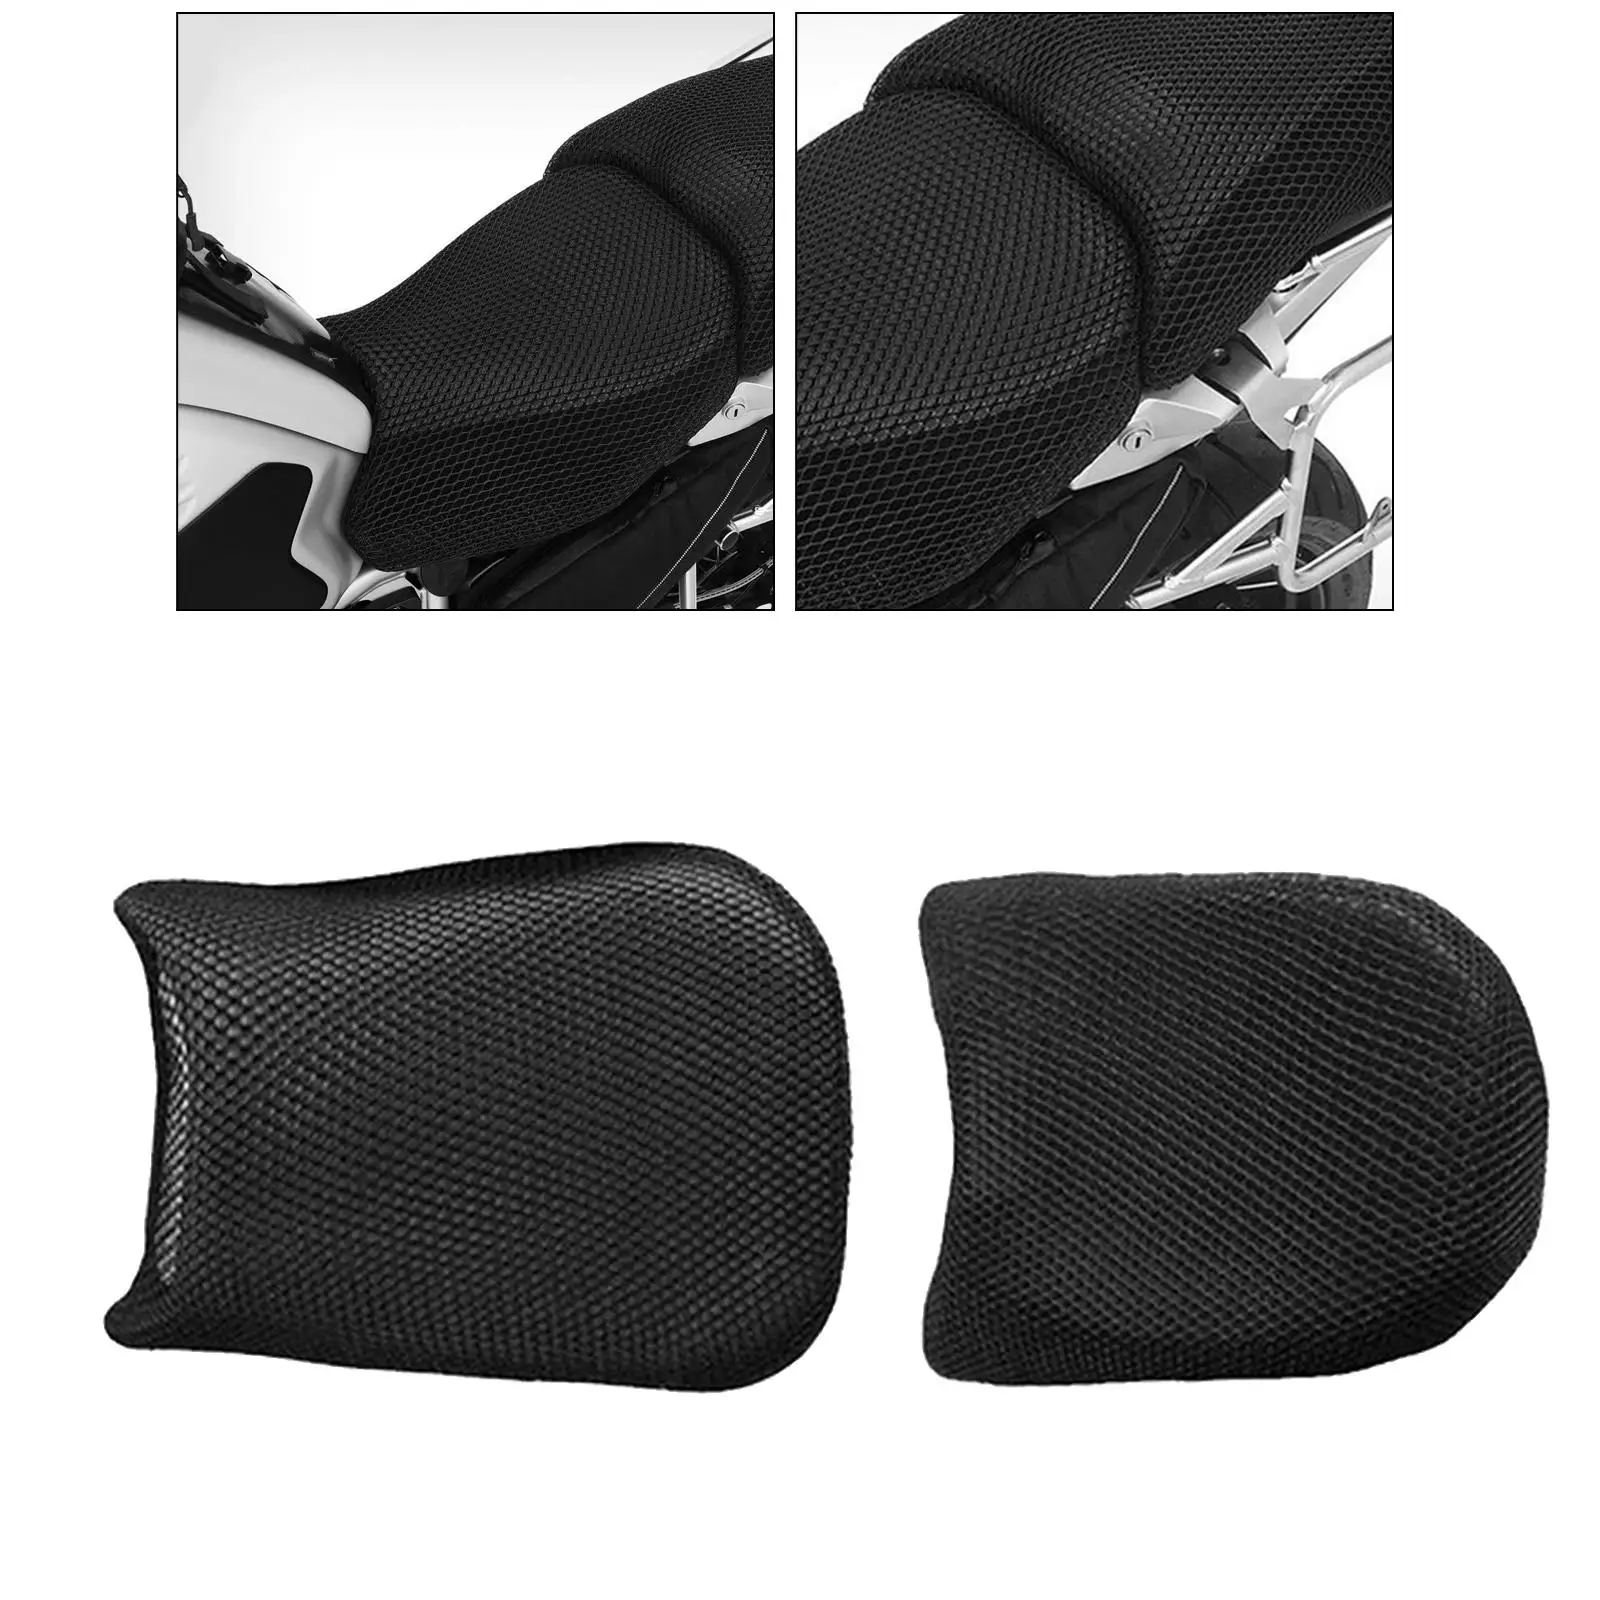 Sport Motorcycle Bikes Comfort Saddle Seat  Covers Comfortable Pressure  Accessories for   